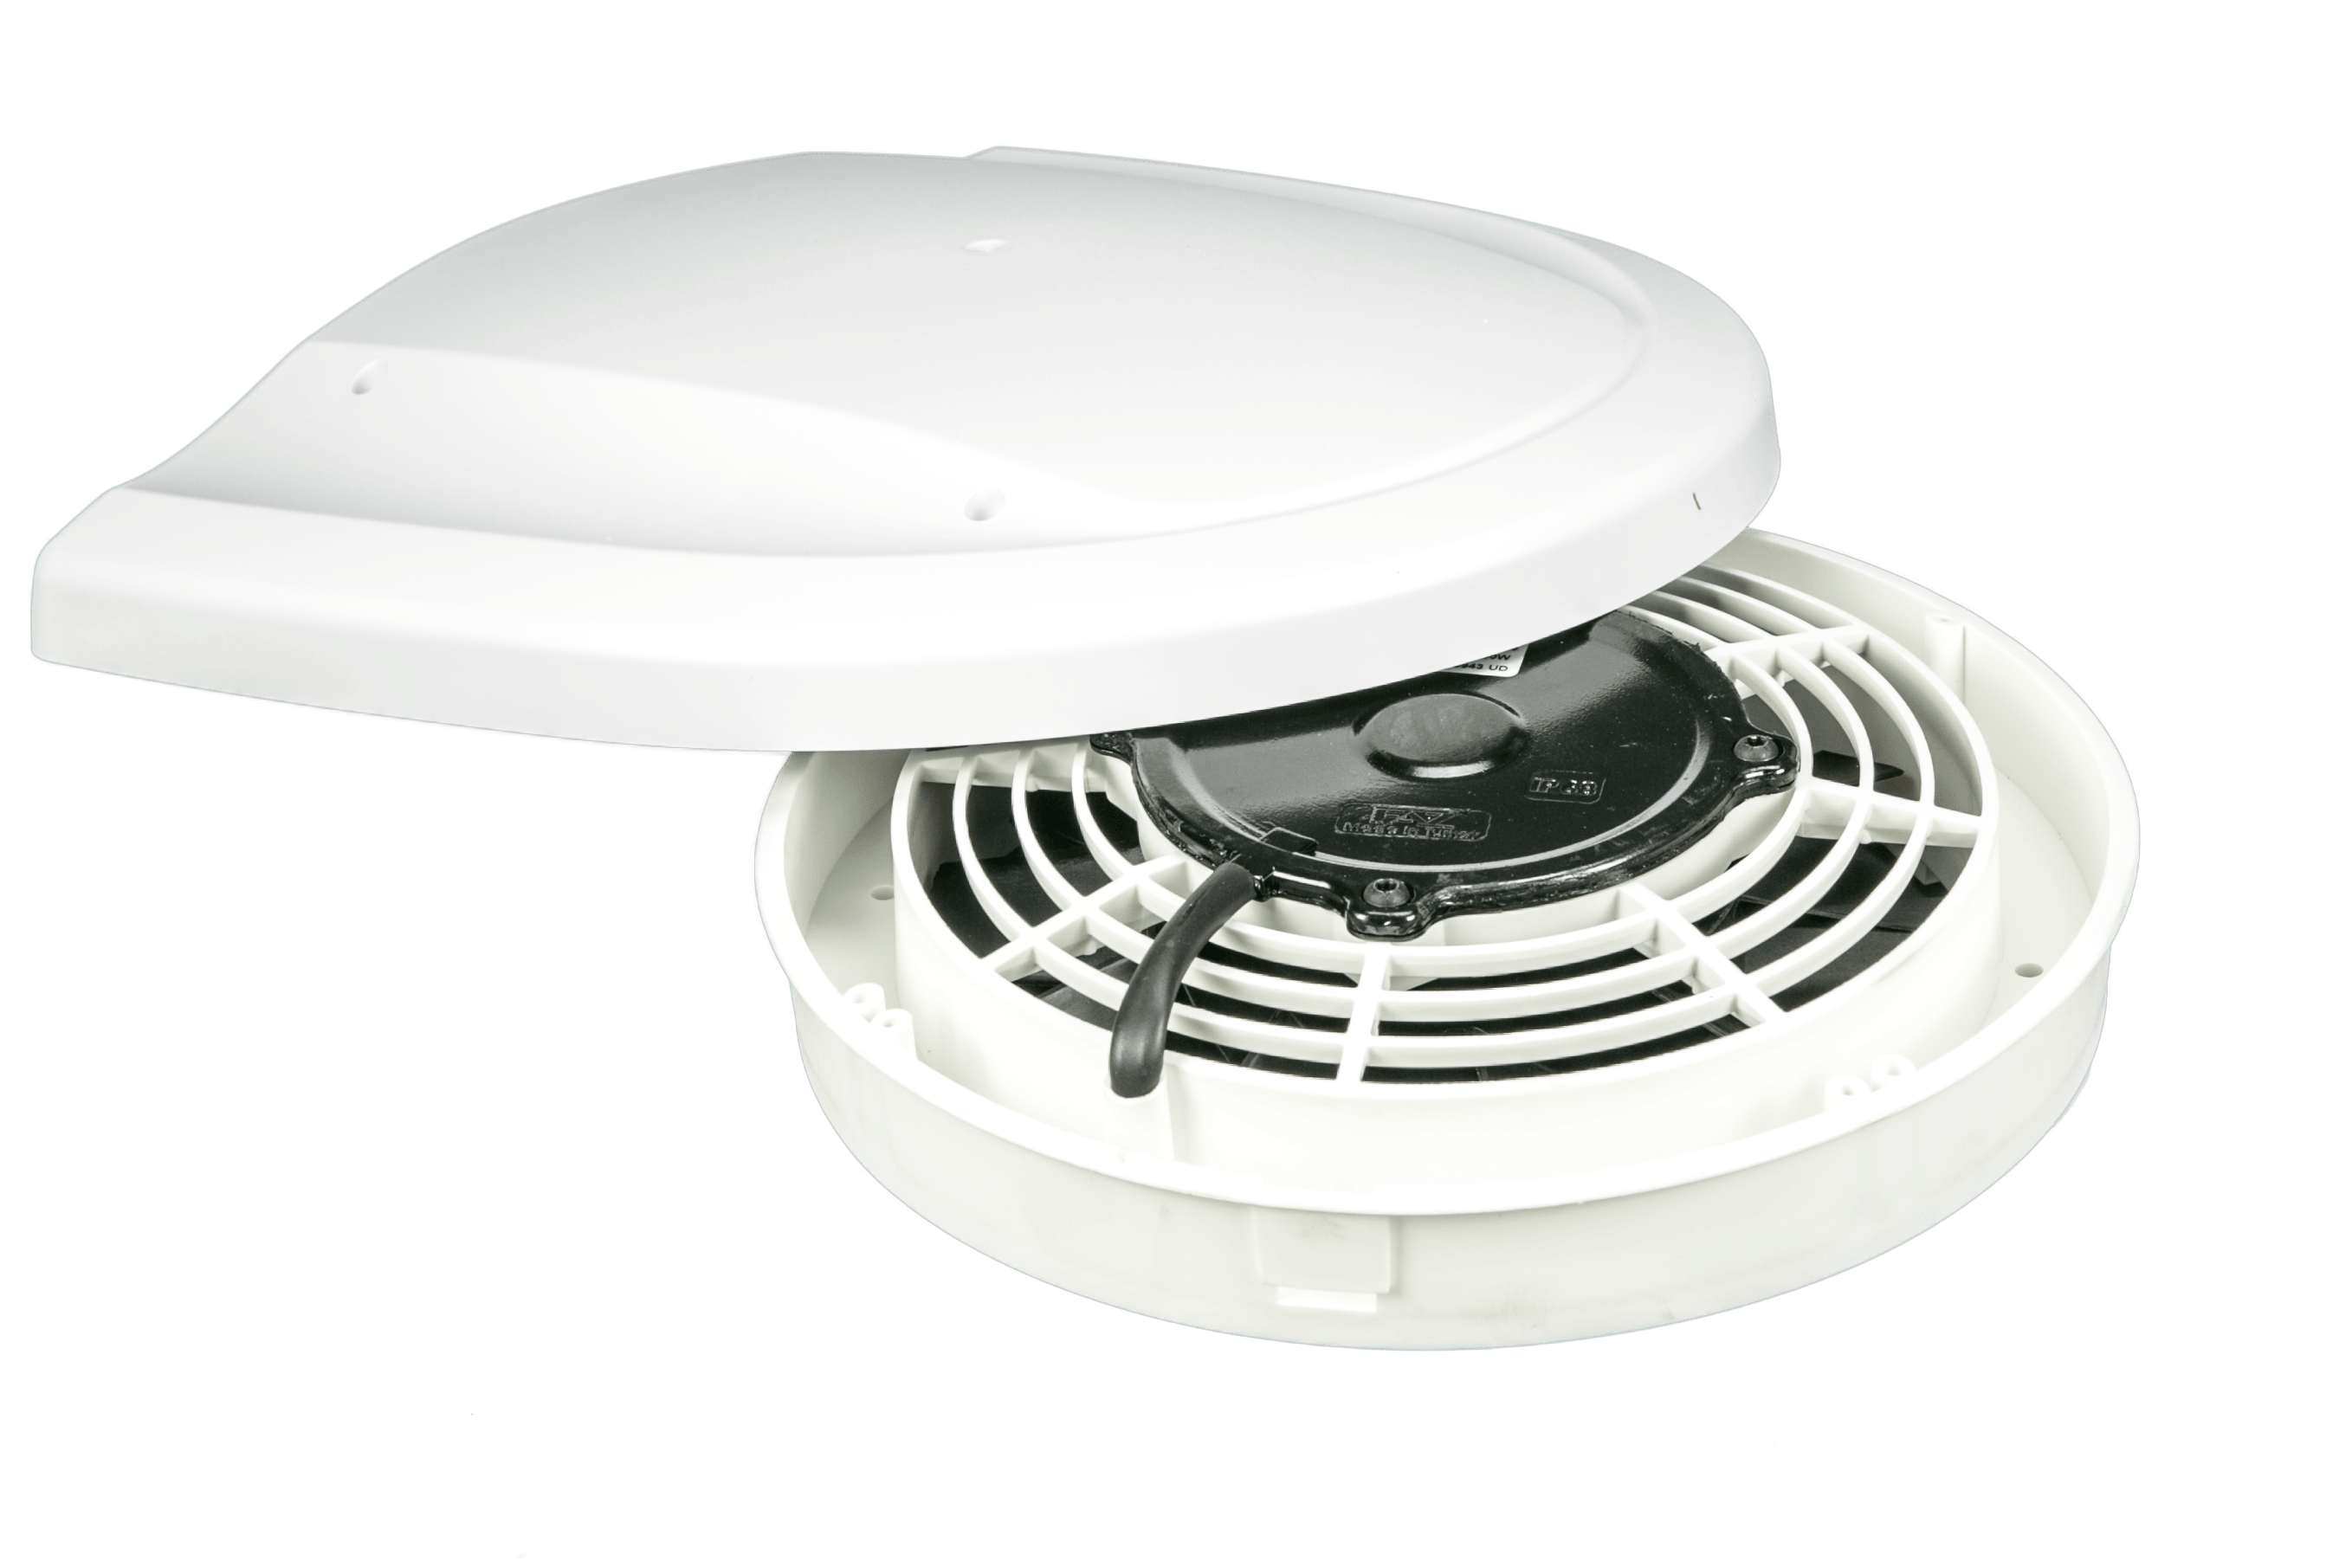 Auto ventilator with or without grid - Siroco